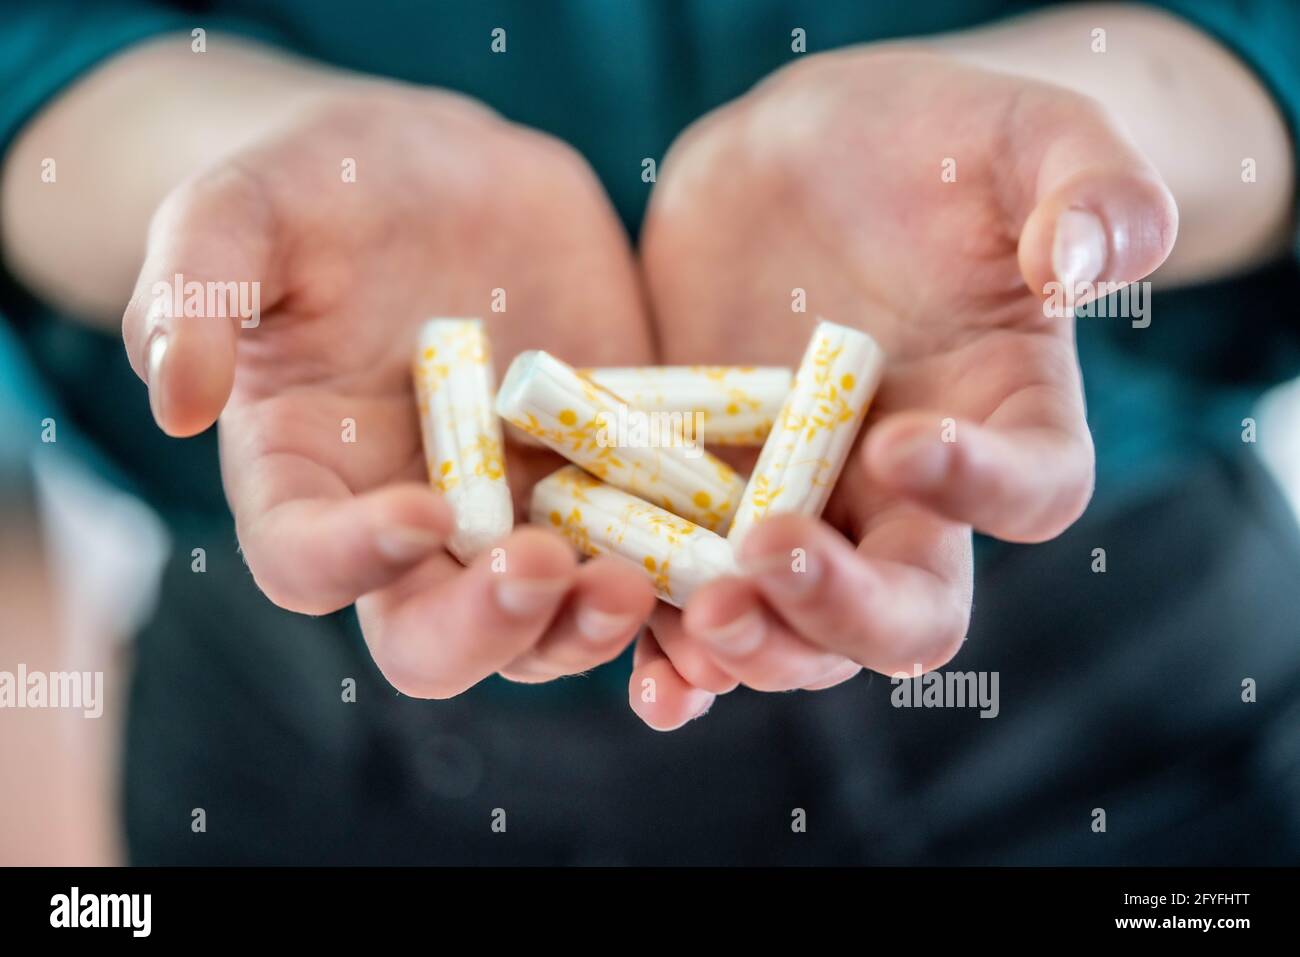 Woman holding tampons. Stock Photo